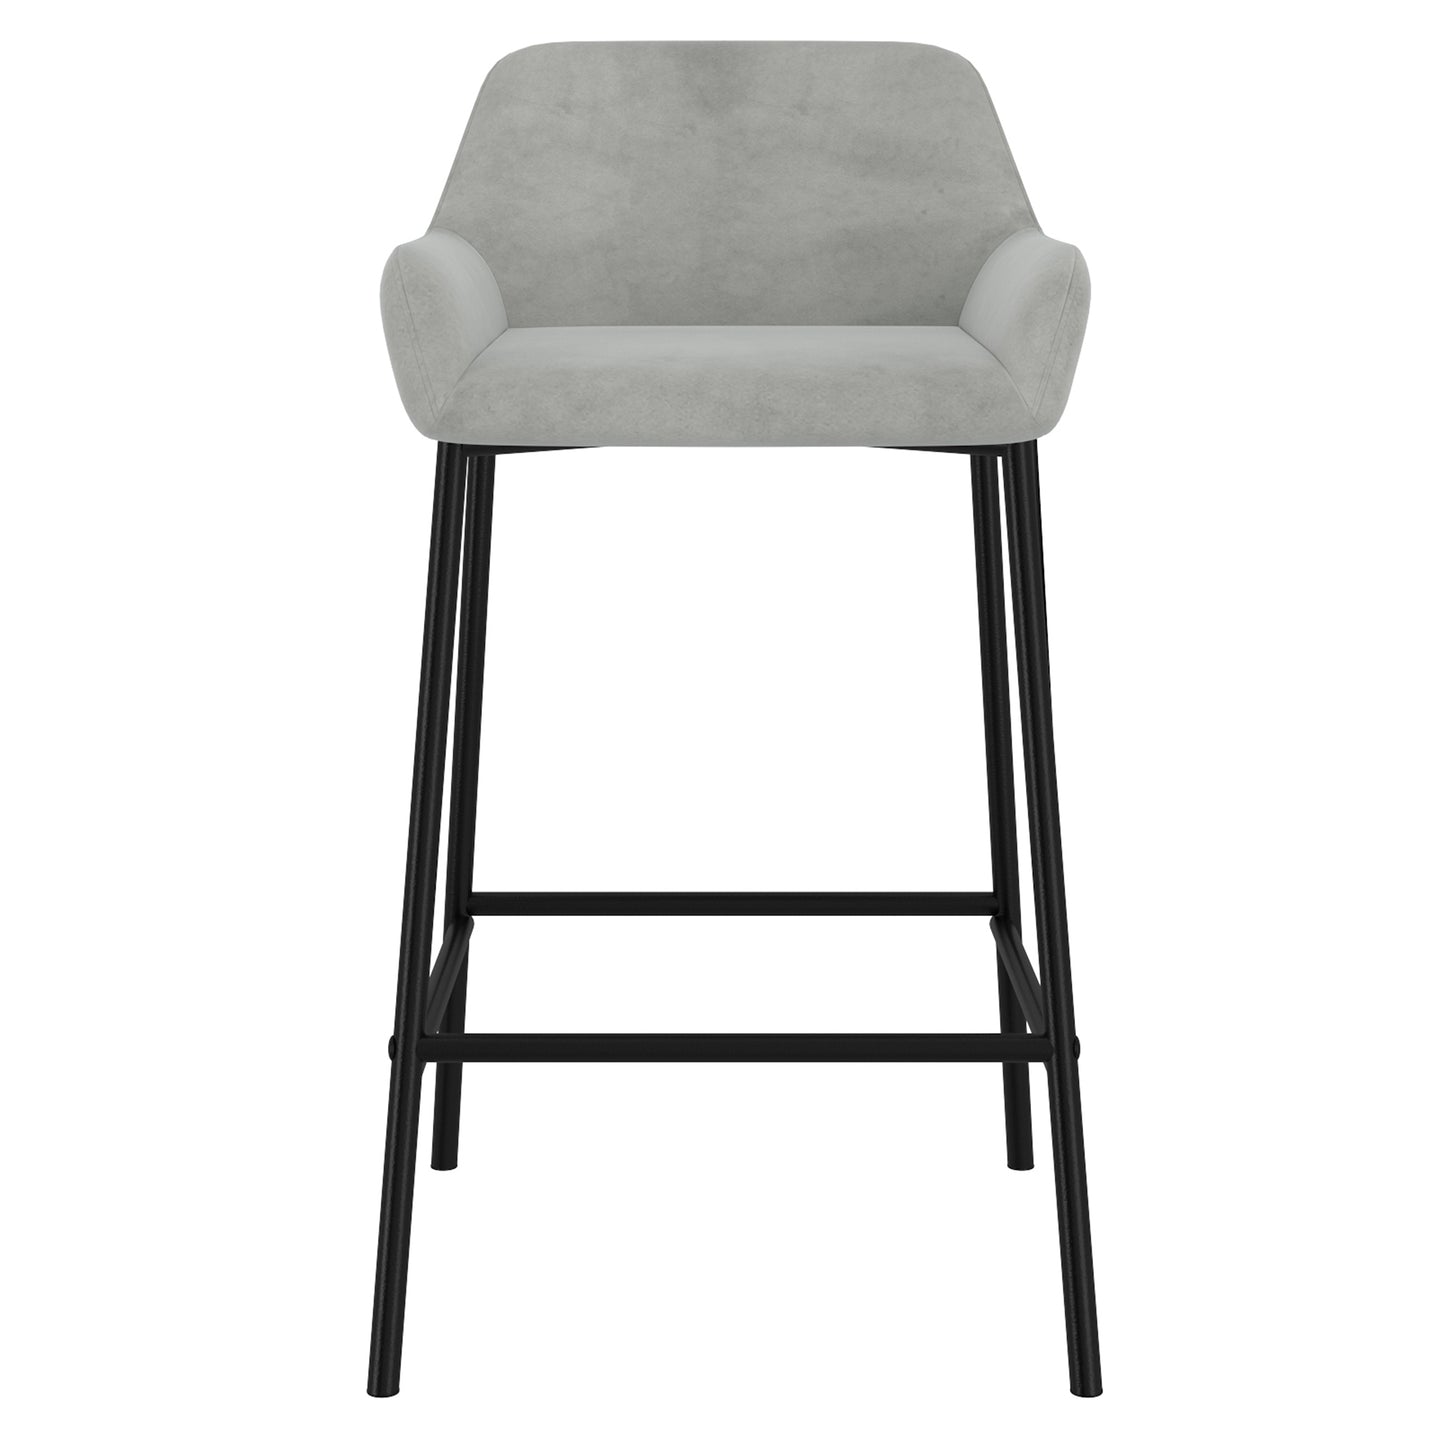 (BAILY GREY- 2 PACK)- VELVET FABRIC COUNTER STOOLS